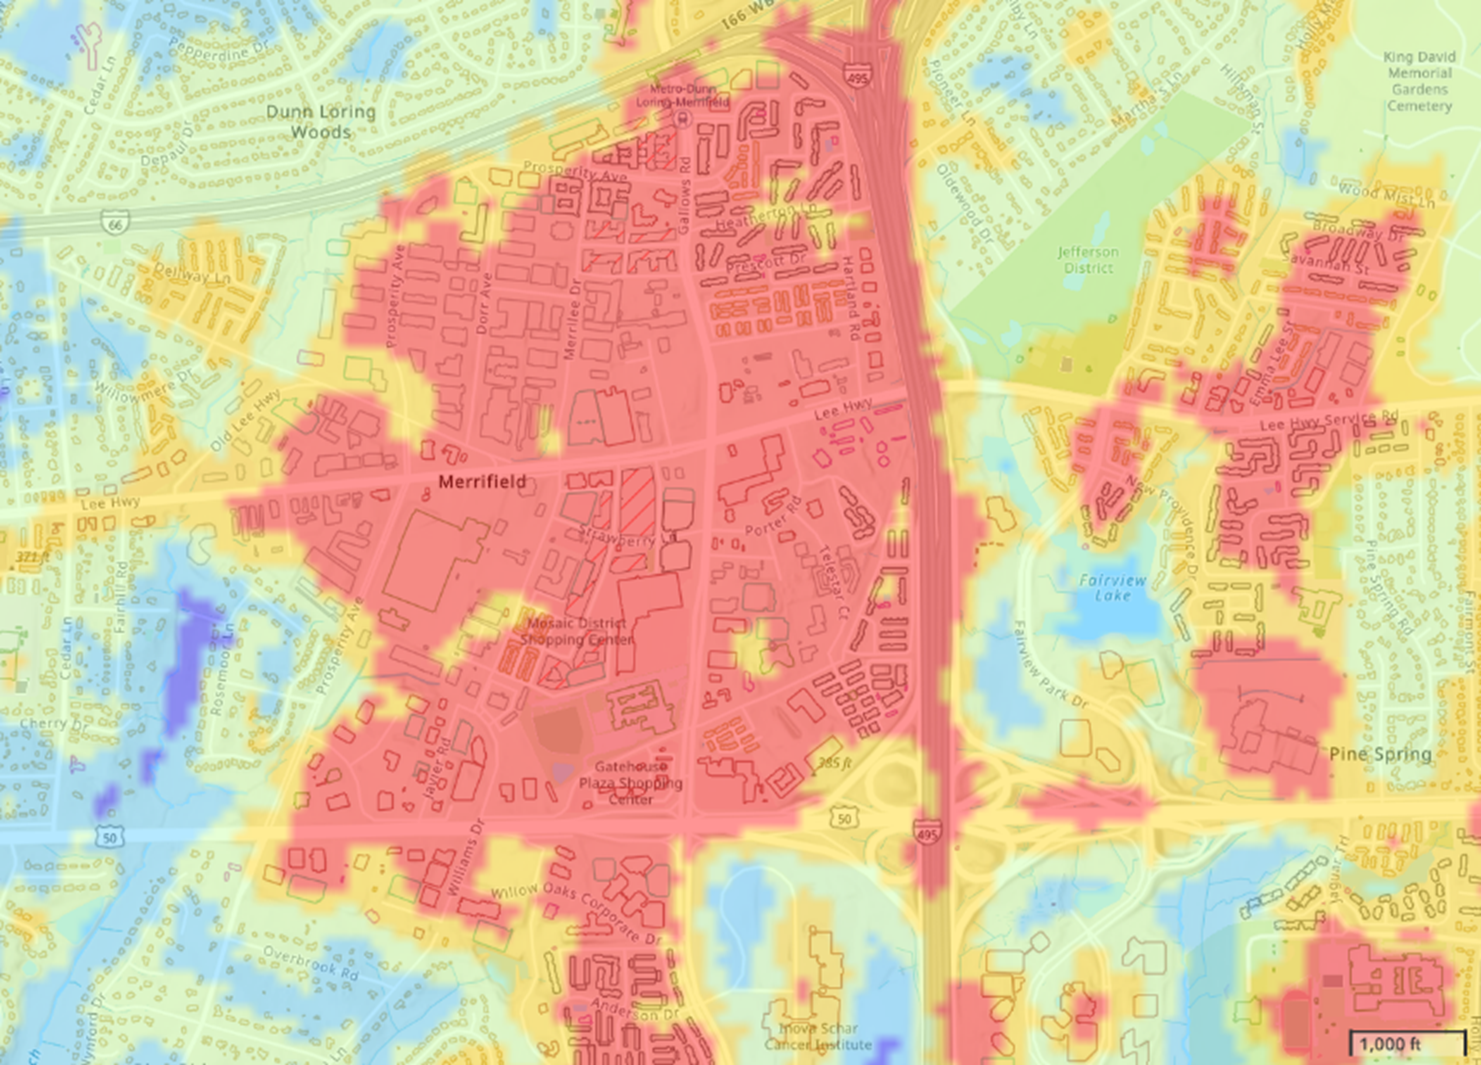 zoomed in area of buildings affected by urban heat island effect